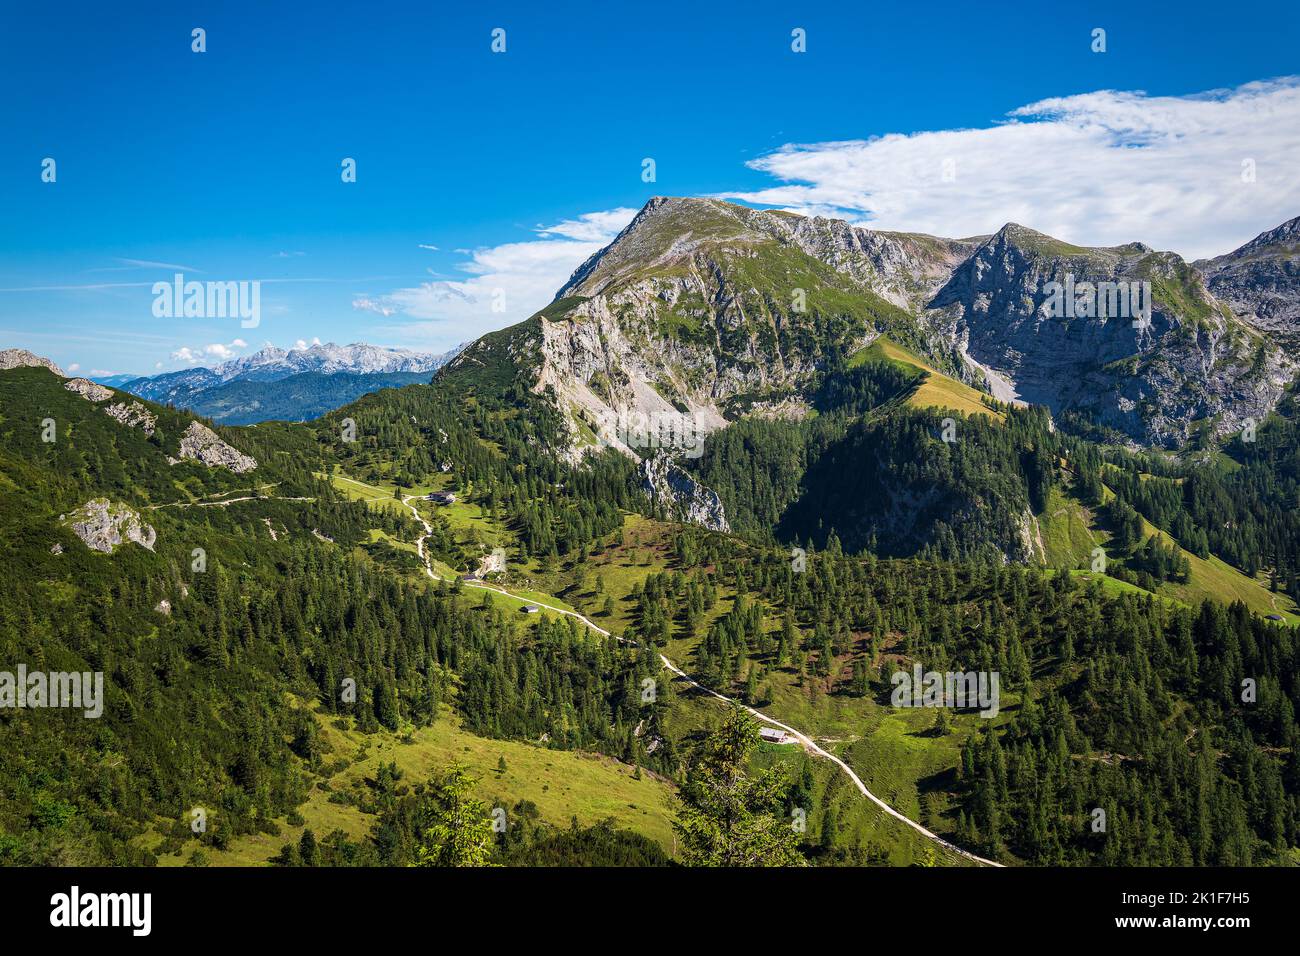 View from the mountain Jenner in the Berchtesgaden Alps, Germany. Stock Photo